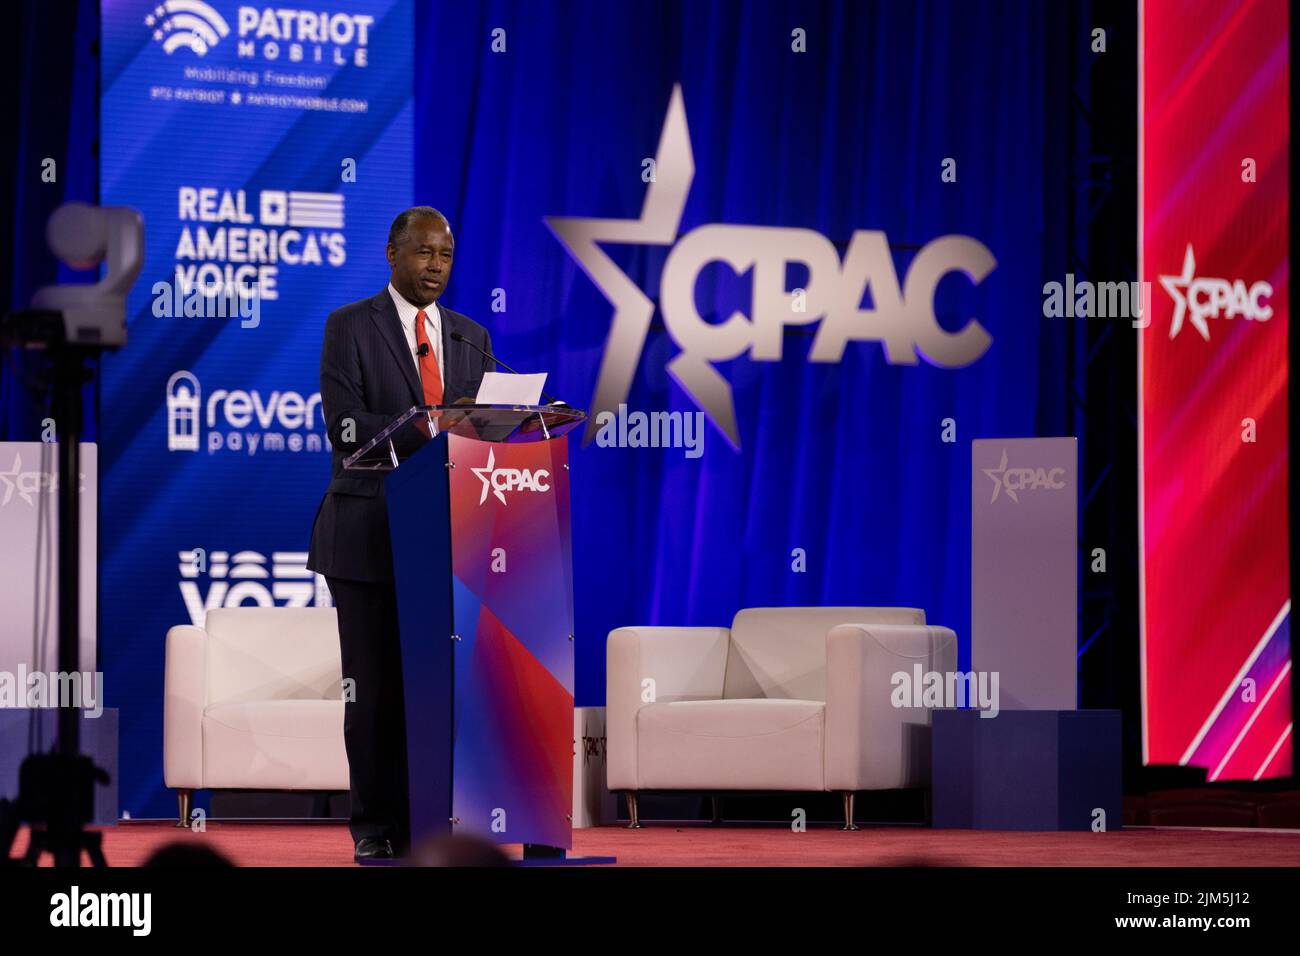 Dallas, USA. 04 Aug 2022. Dr Ben Carson delivers remarks at the Conservative Political Action Conference. Credit: Valerio Pucci / Alamy Stock Photo